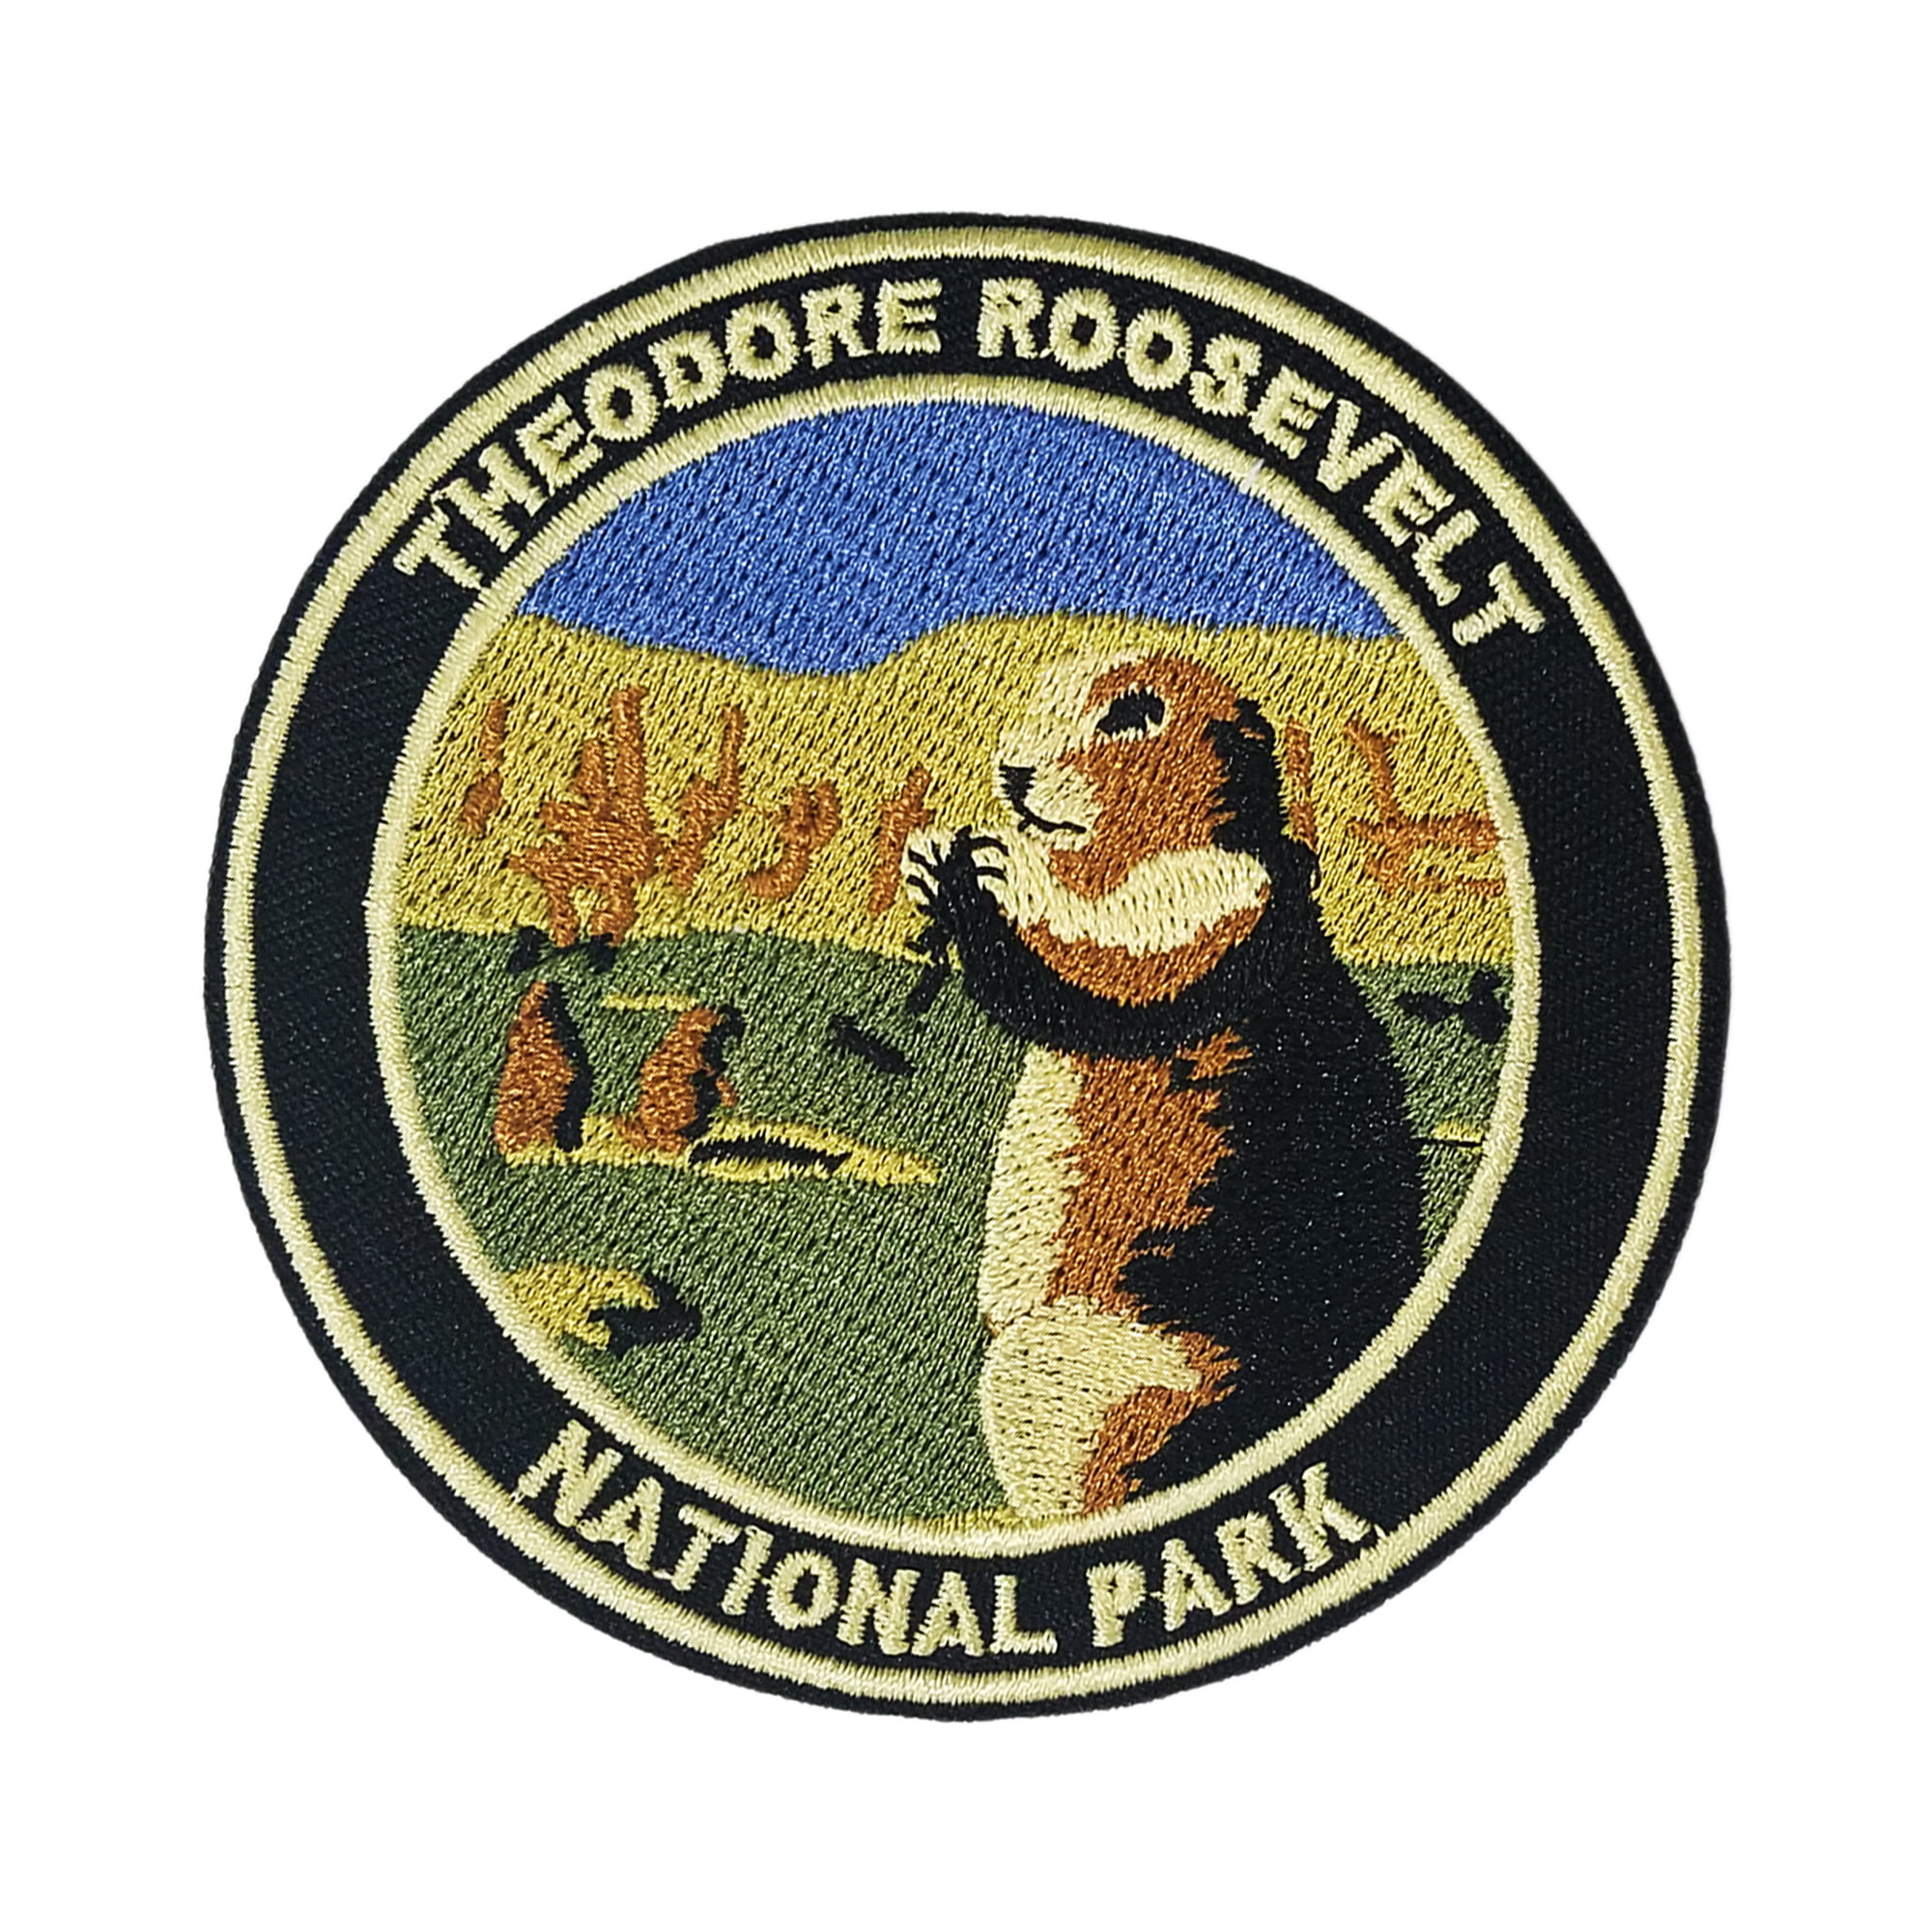 Theodore Roosevelt National Park Embroidered Patch Iron-On Souvenir Explore 